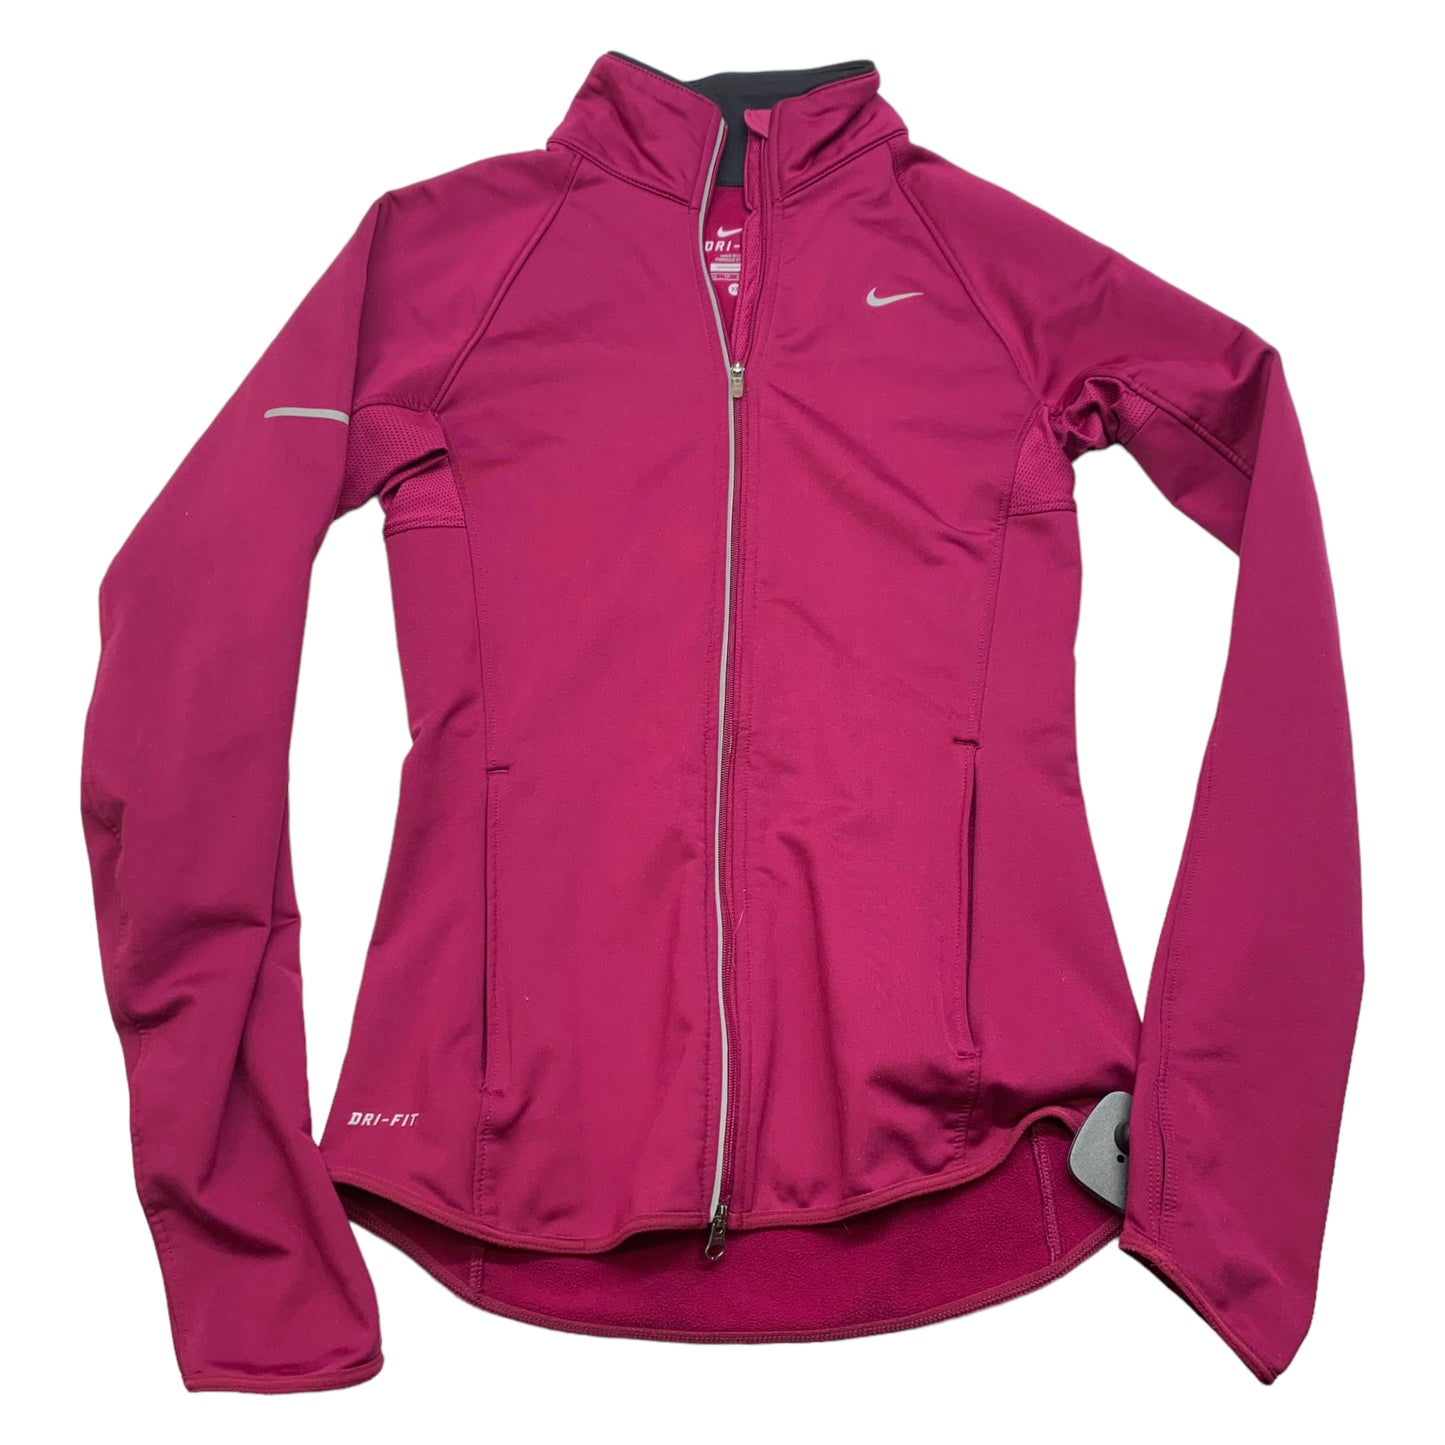 Athletic Jacket By Nike Apparel  Size: Xs